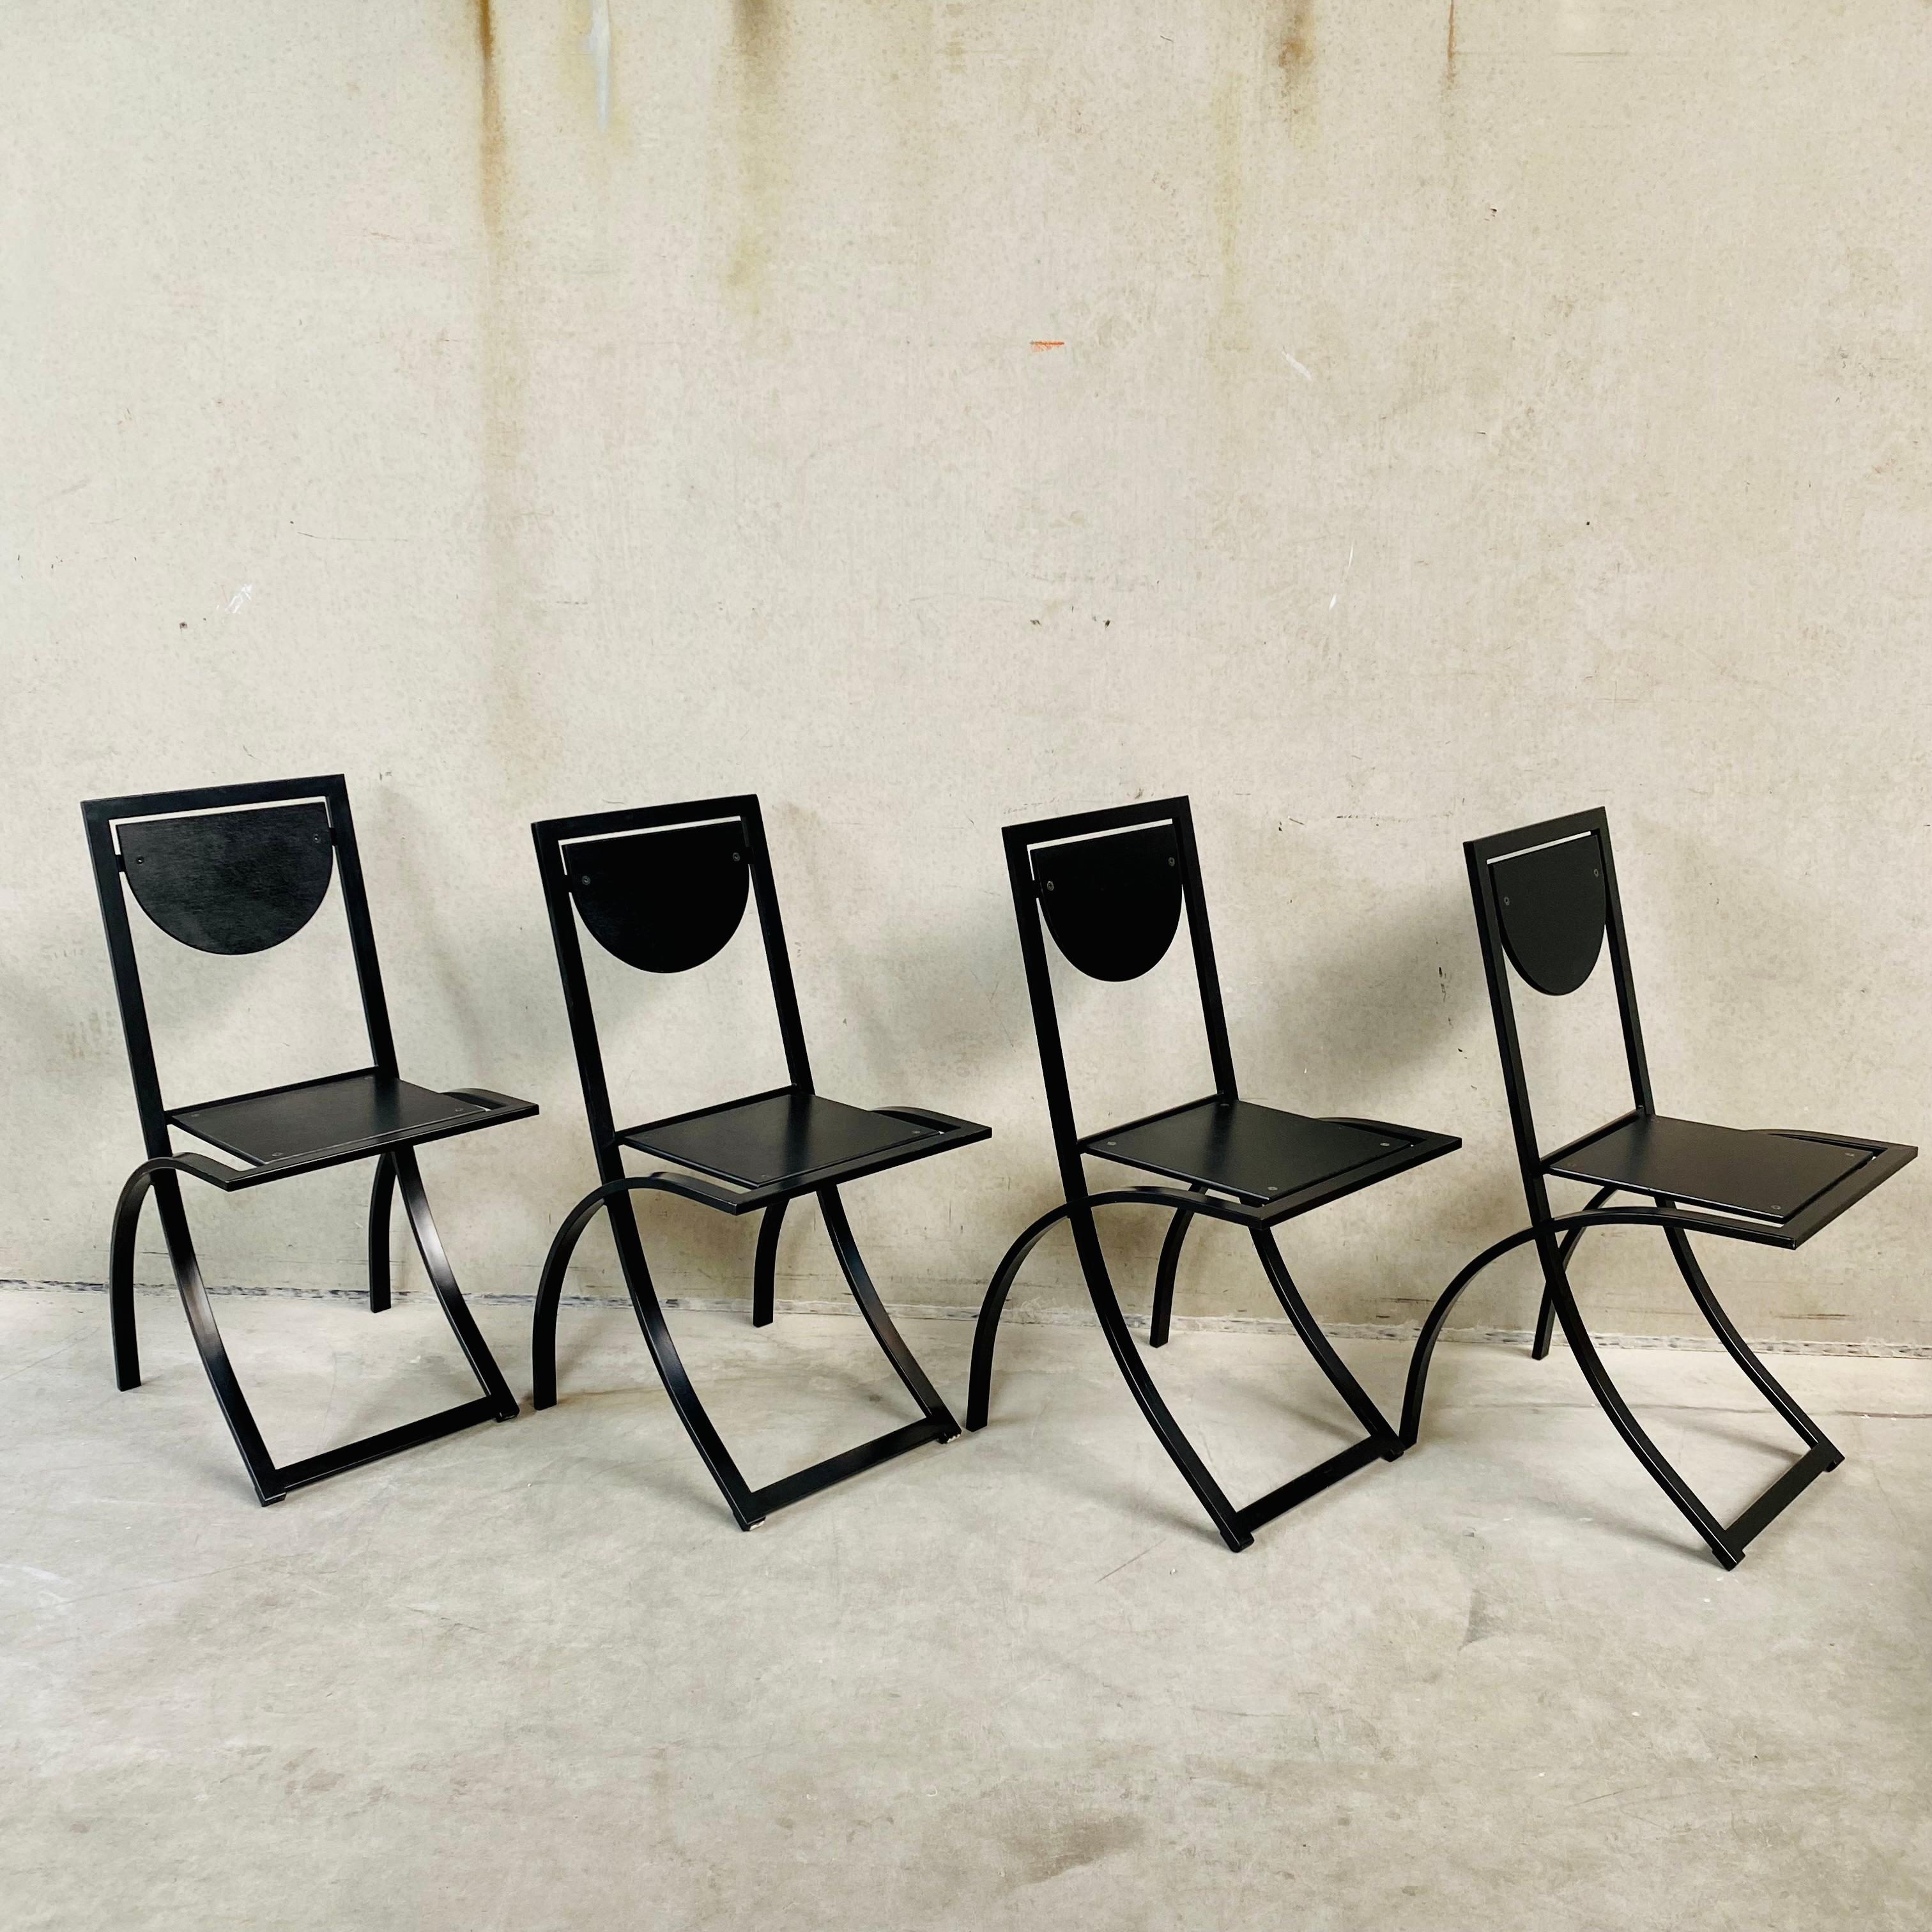 4 x KFF Black Smoked Oak Dining Chairs by Karl Friedrich Förster 1980 For Sale 9